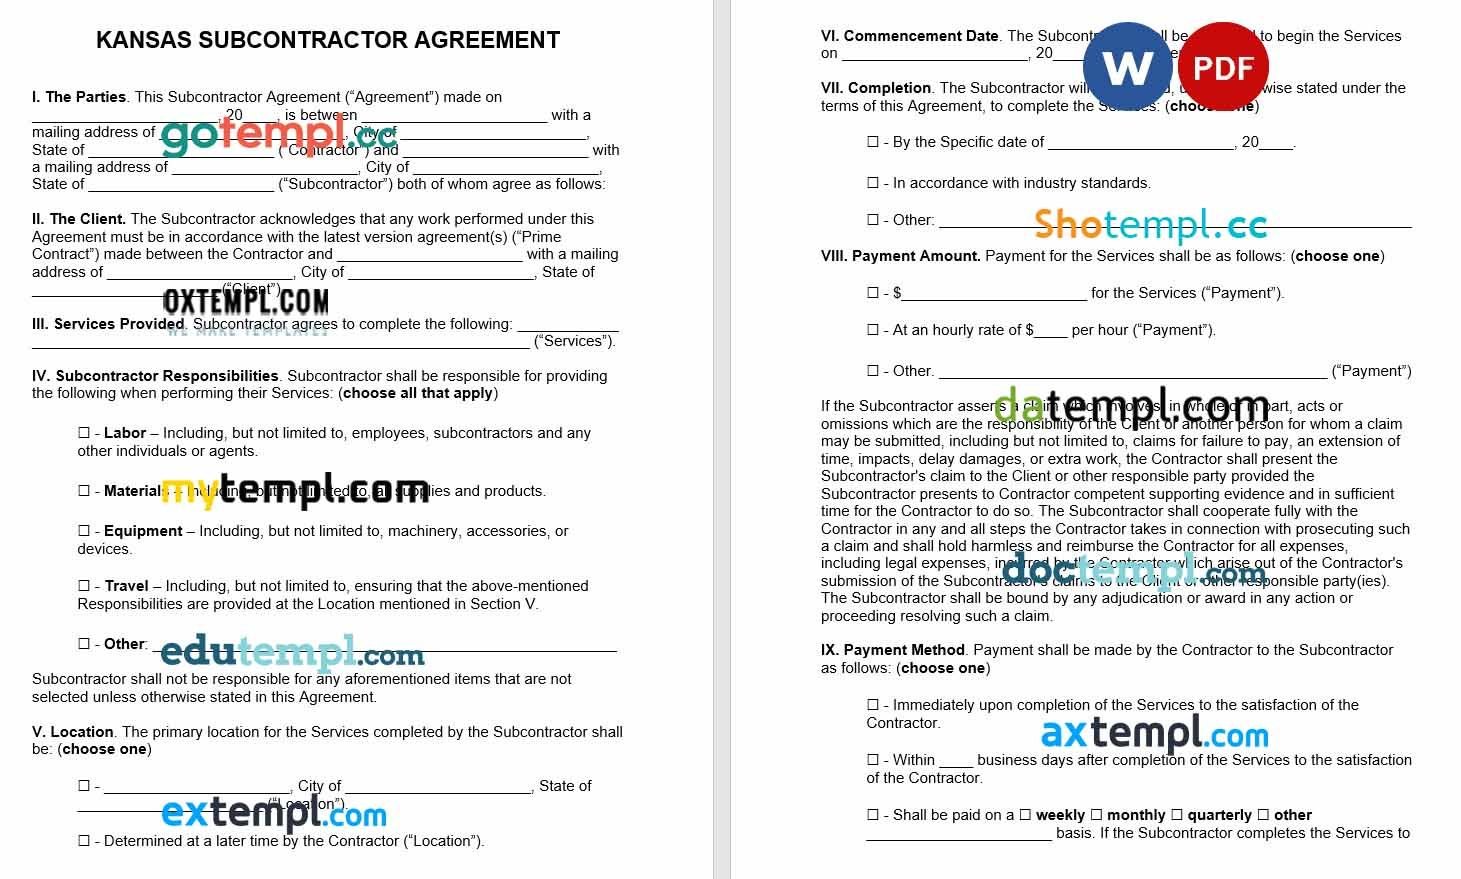 Kansas Subcontractor Agreement 1 Word example, fully editable